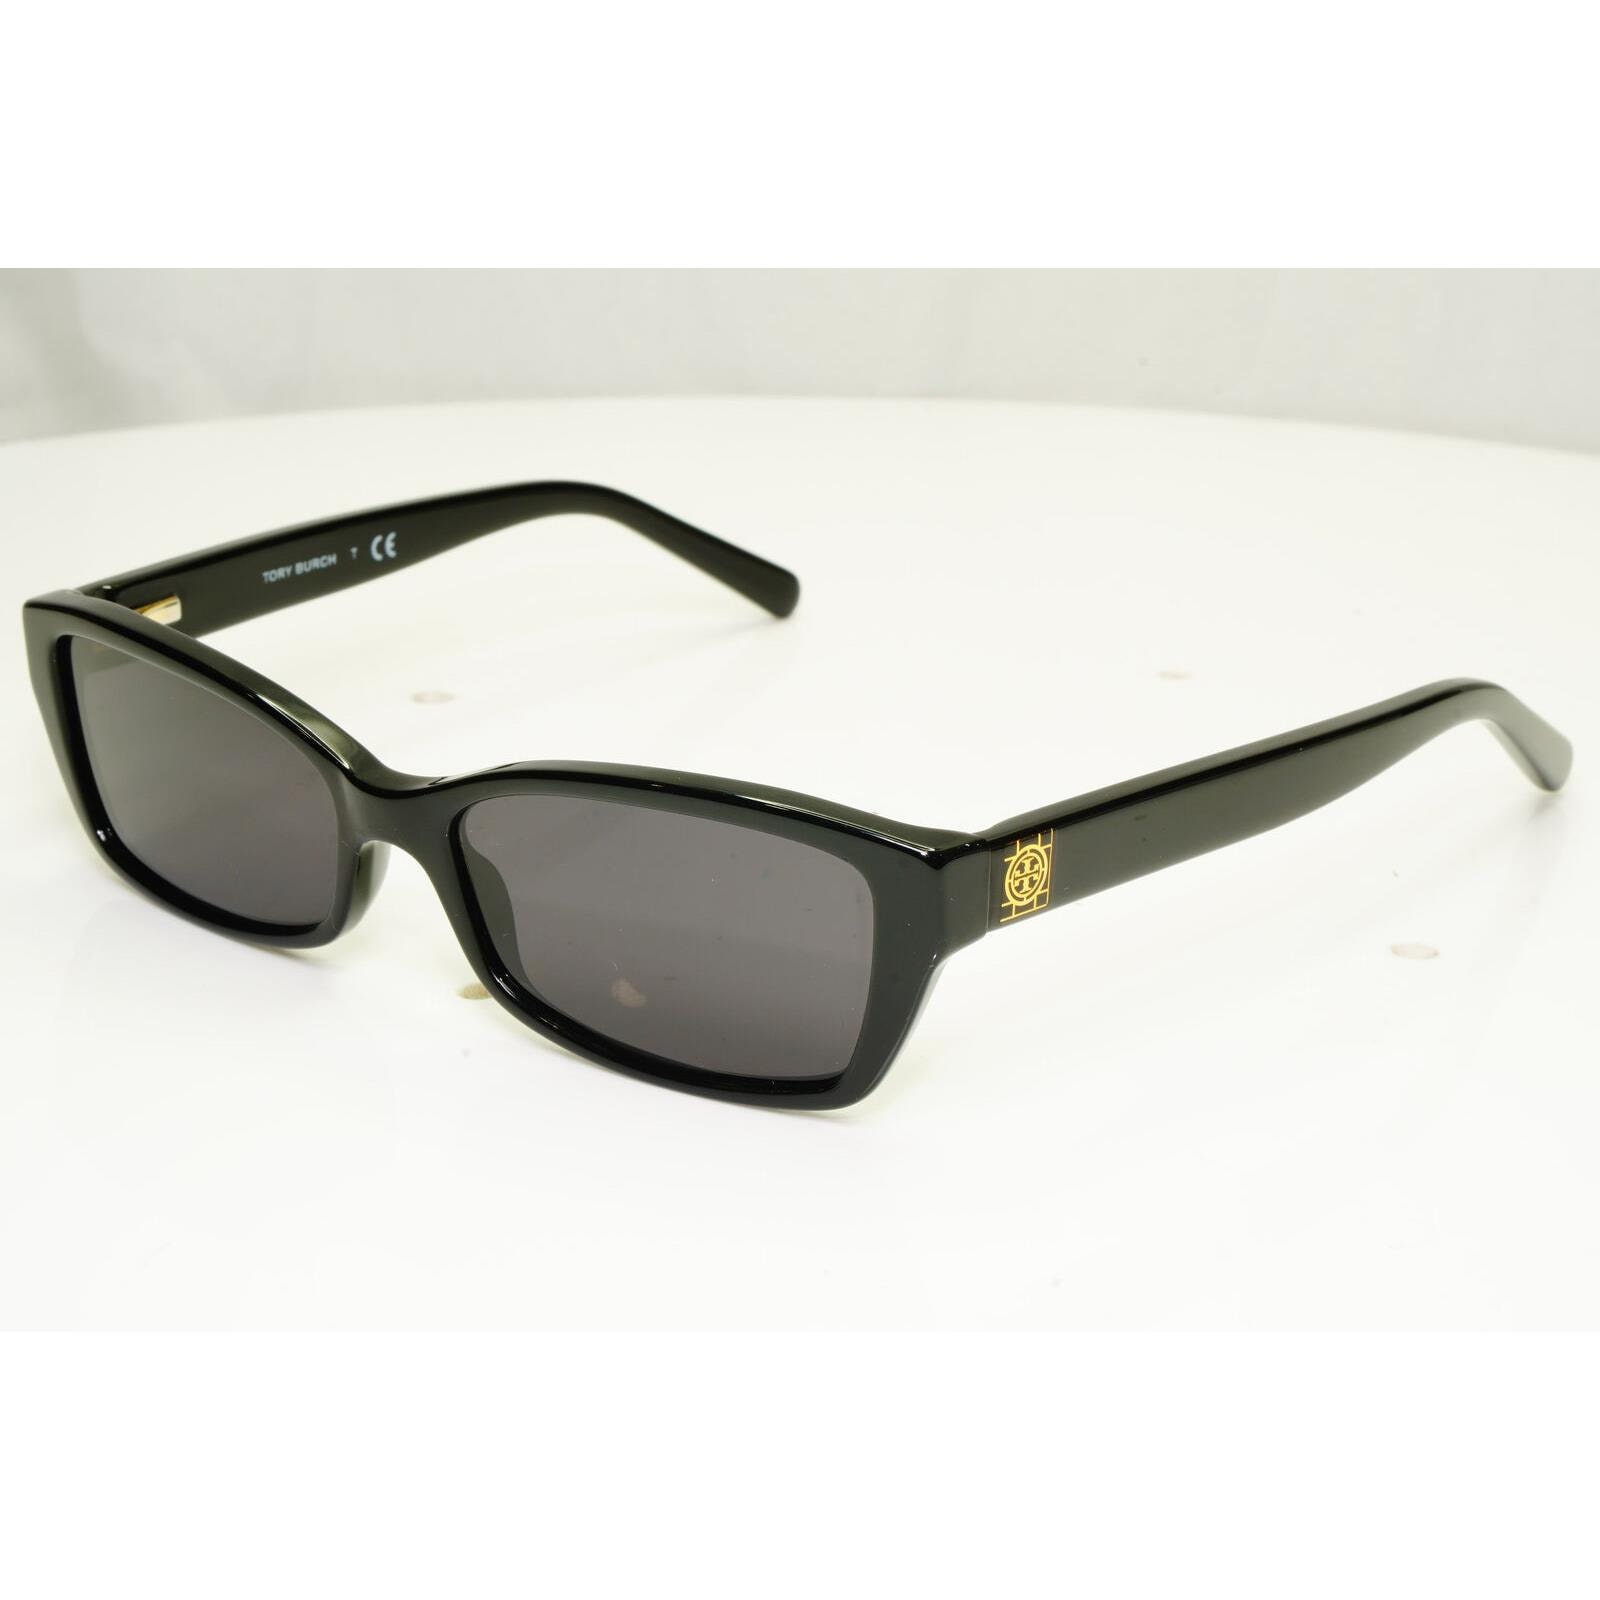 Authentic Tory Burch Womens Sunglasses Gold Black Ty 2041 501 - Etsy India